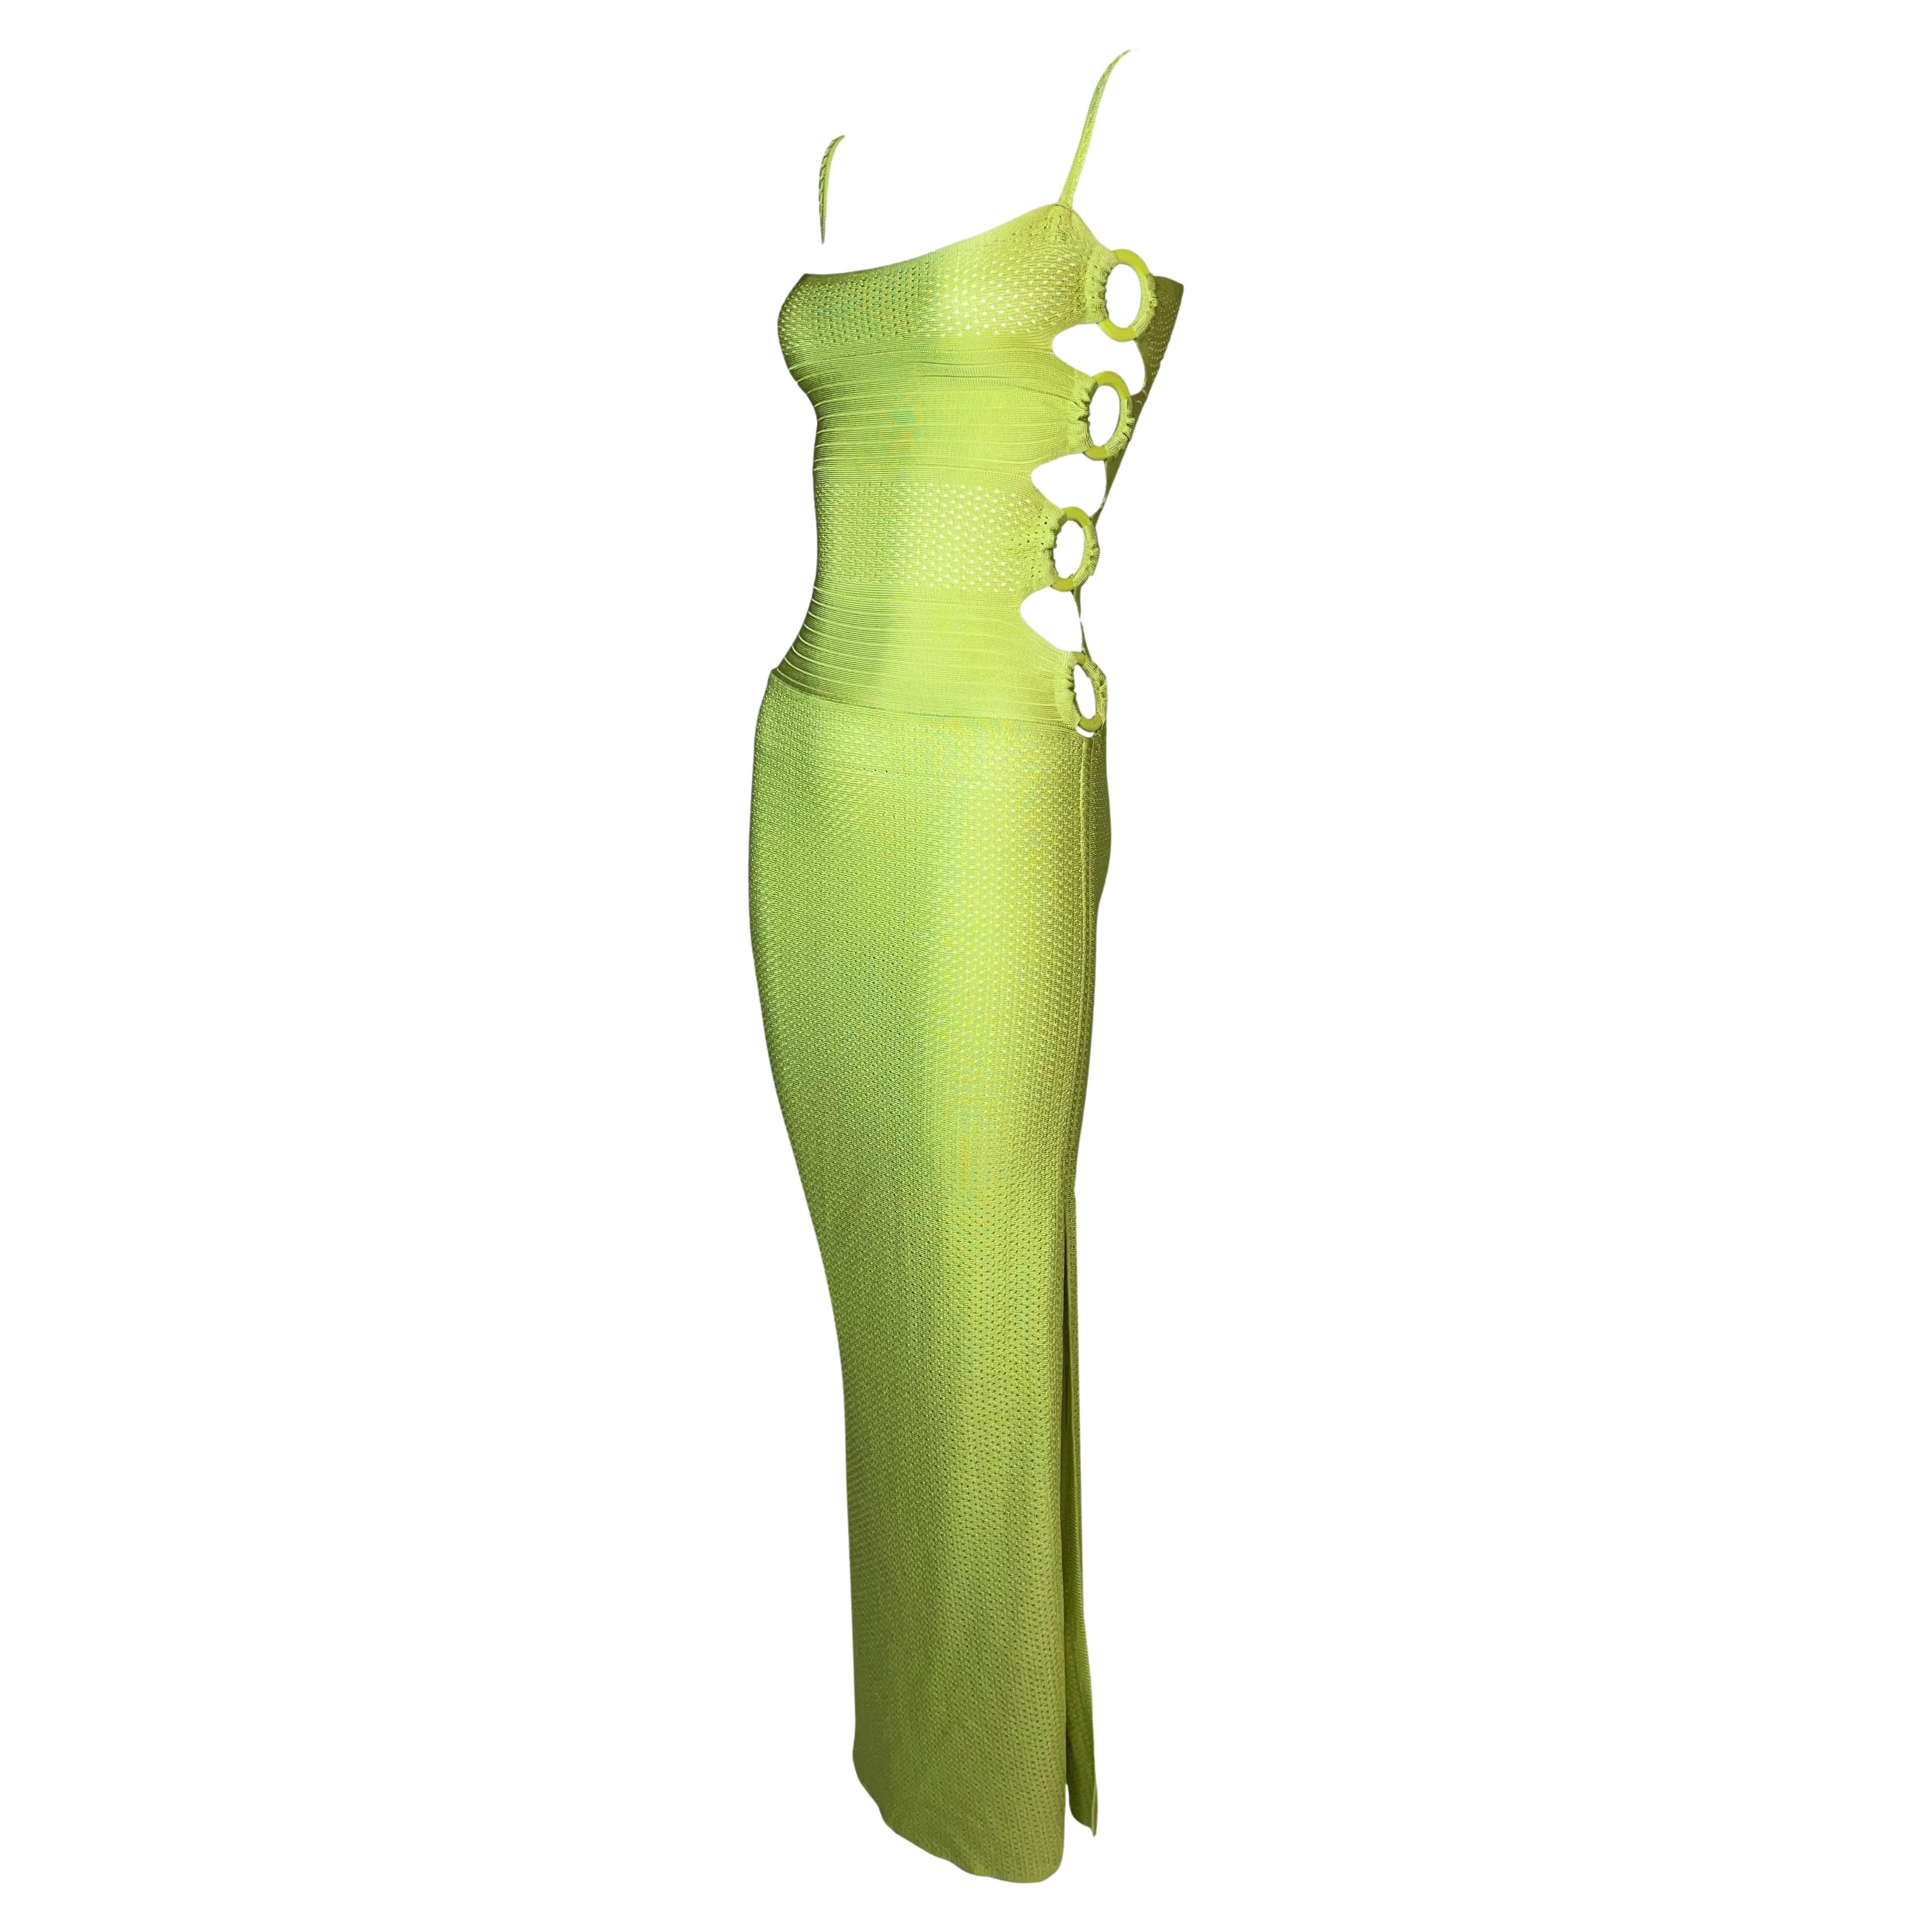 S/S 2002 Christian Dior John Galliano Lime Green Bandage Cut-Out Bodycon Dress